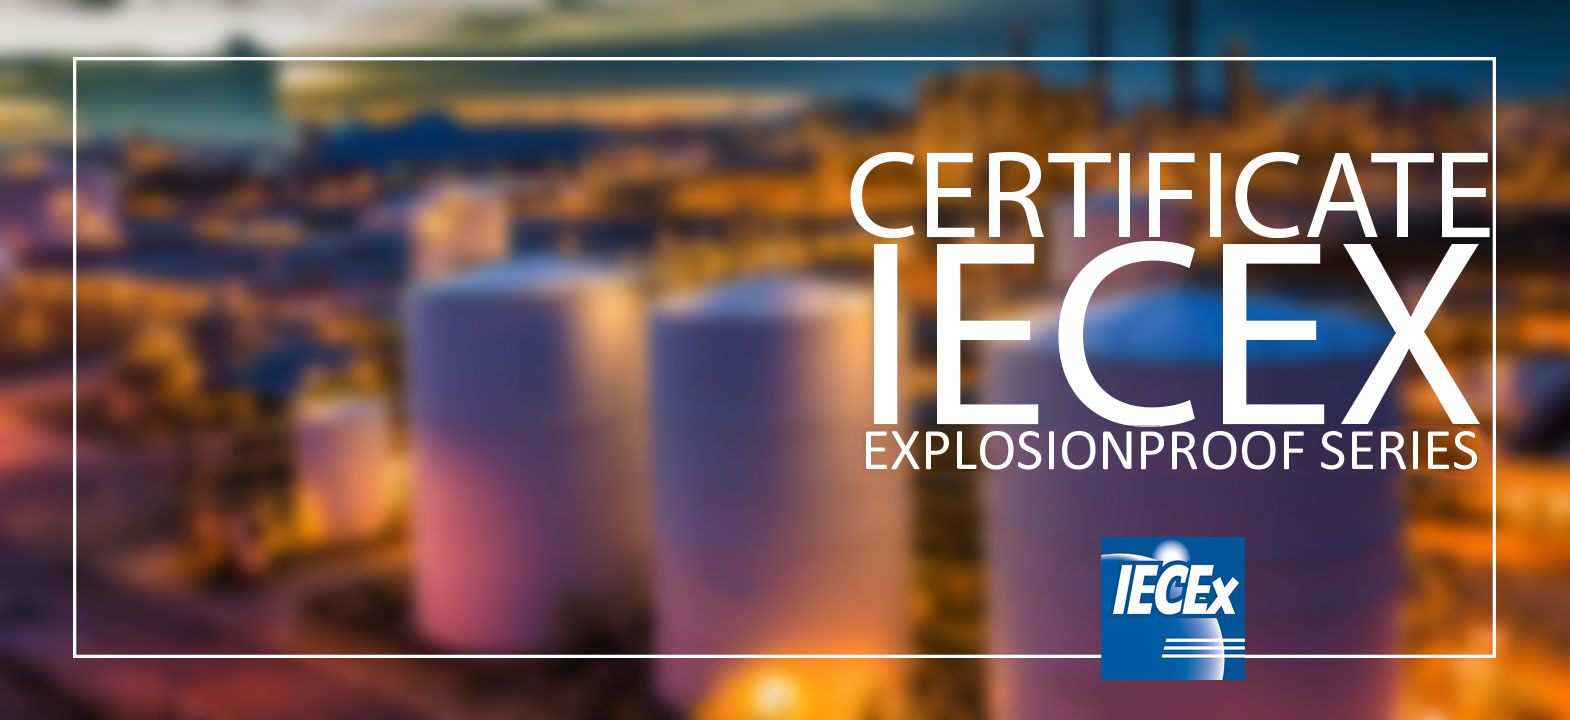 Explosion proof series with IECEx certificate!